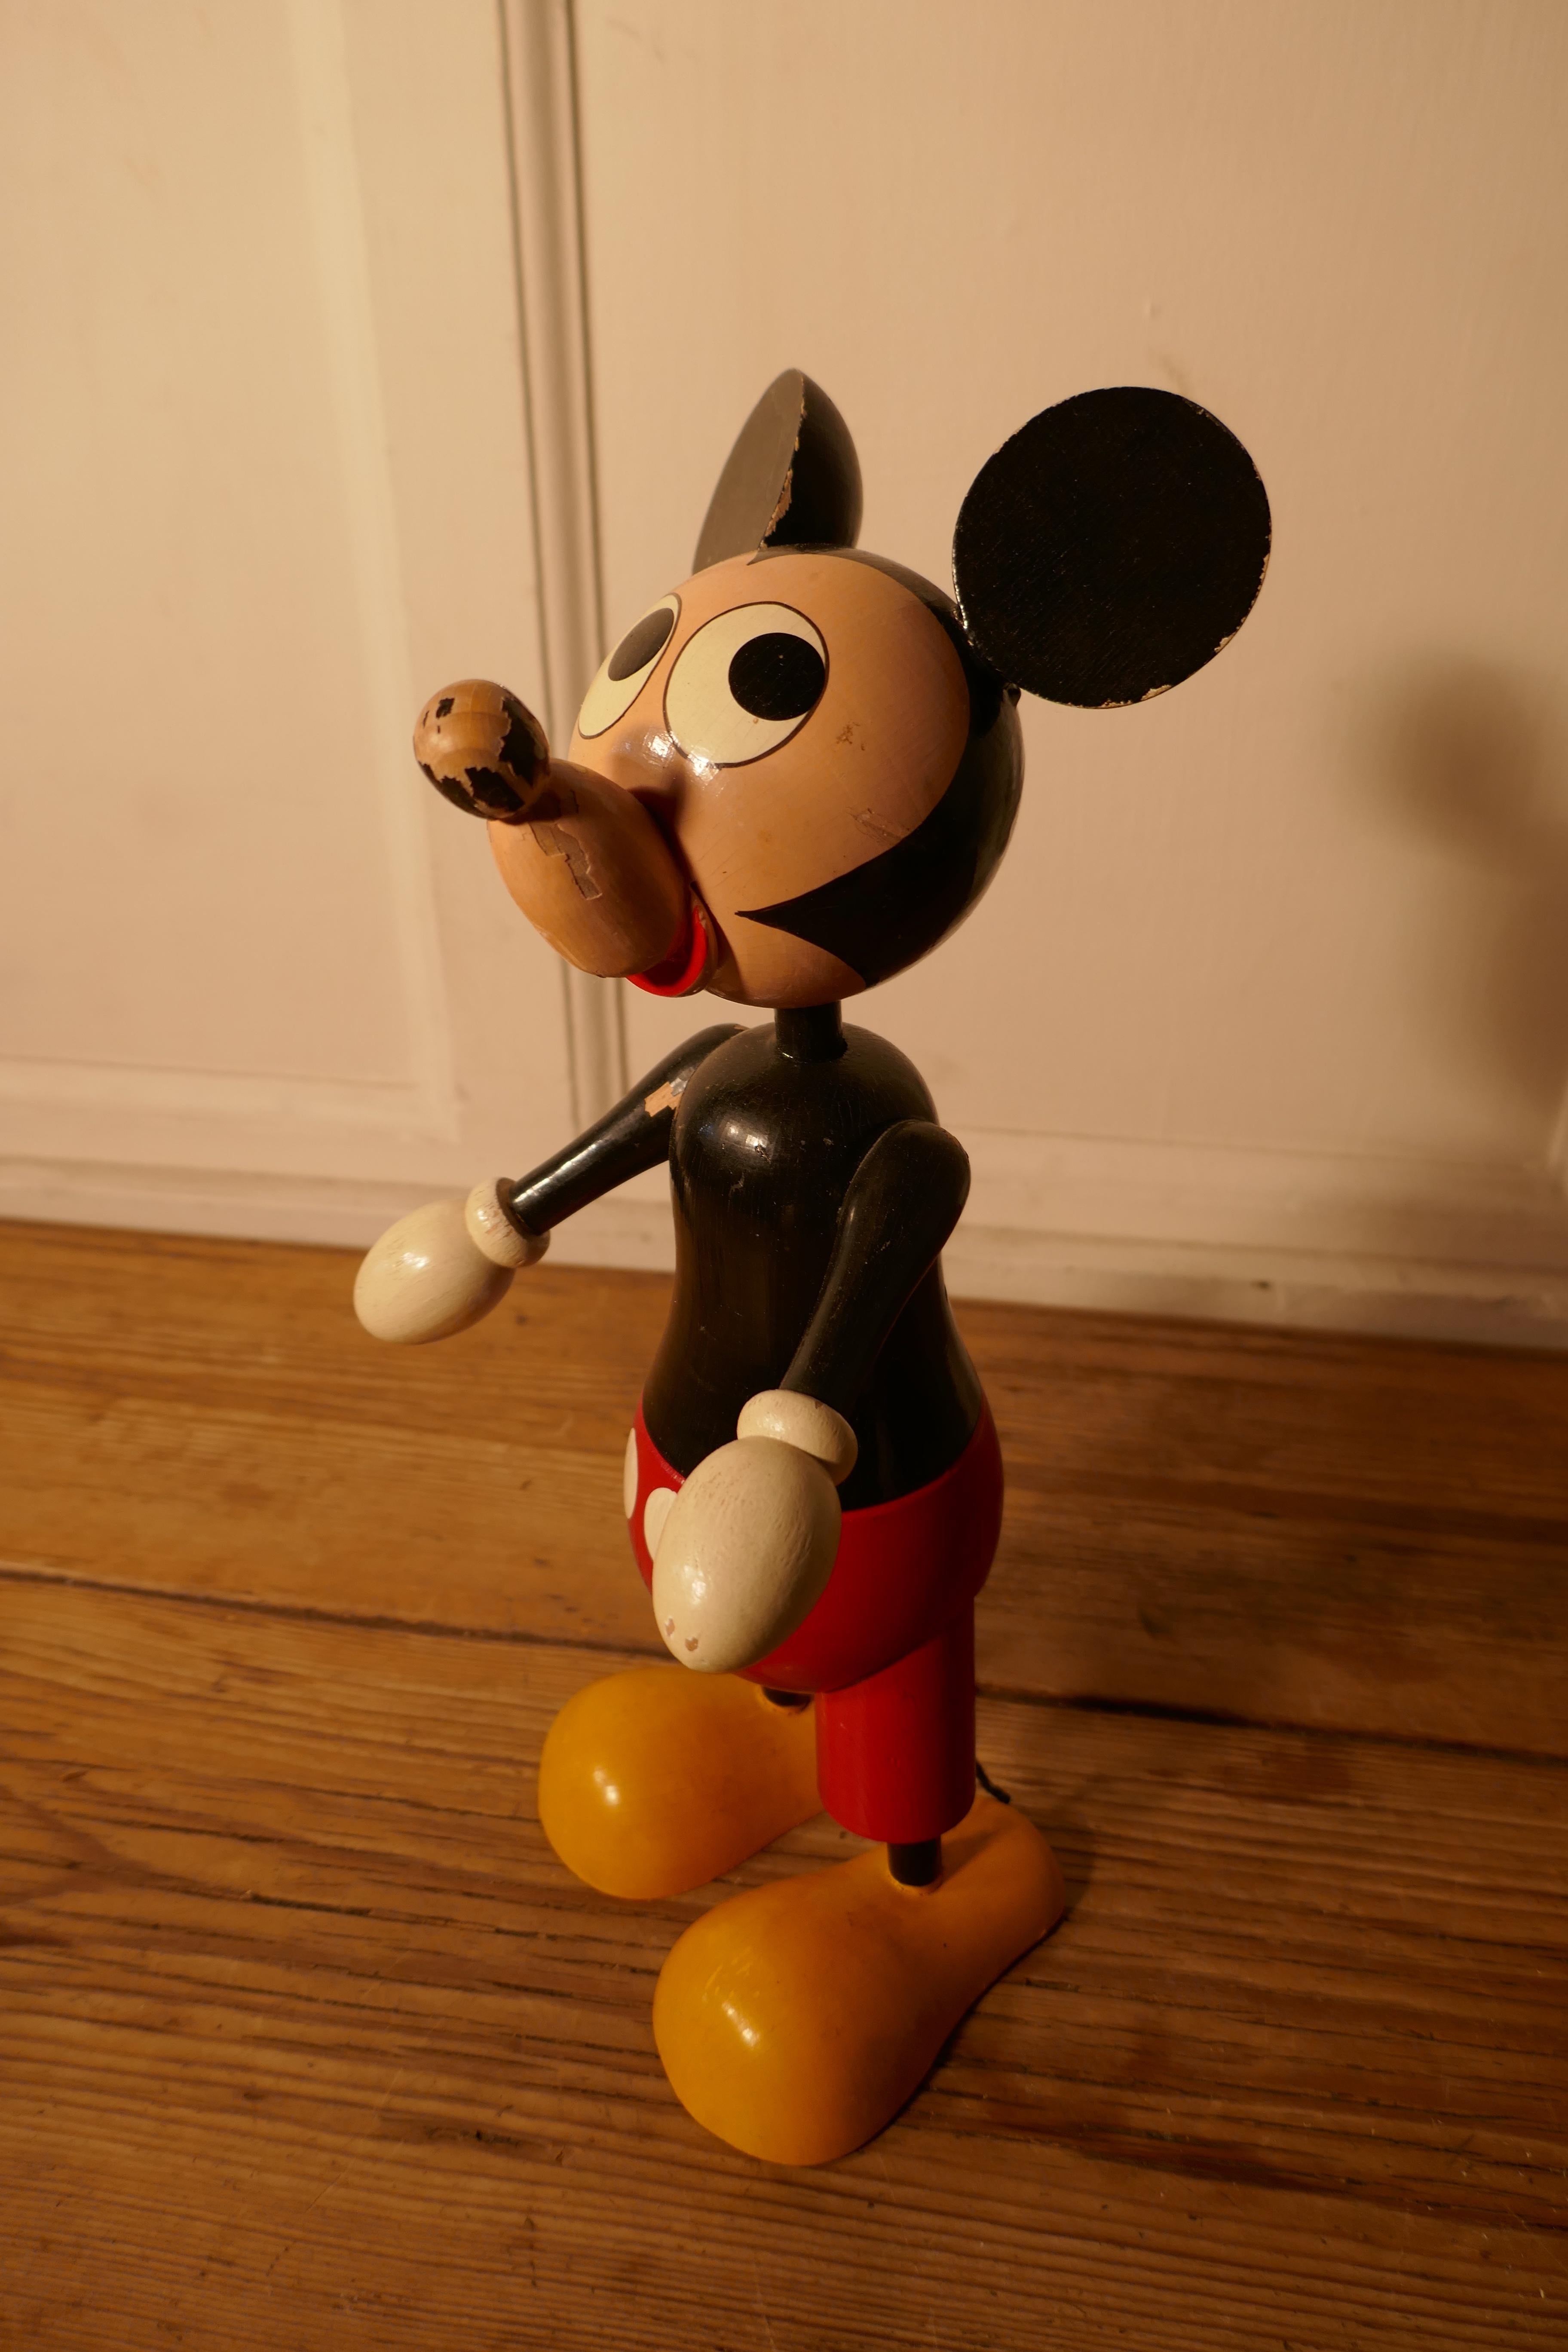 1950s wooden disney Mickey Mouse money box

A rare collectable from around 1950, with a coin slot in his back 
This very desirable money box opens in the middle it is locked by means of a tiny pad lock
The condition is sound with minor wear to